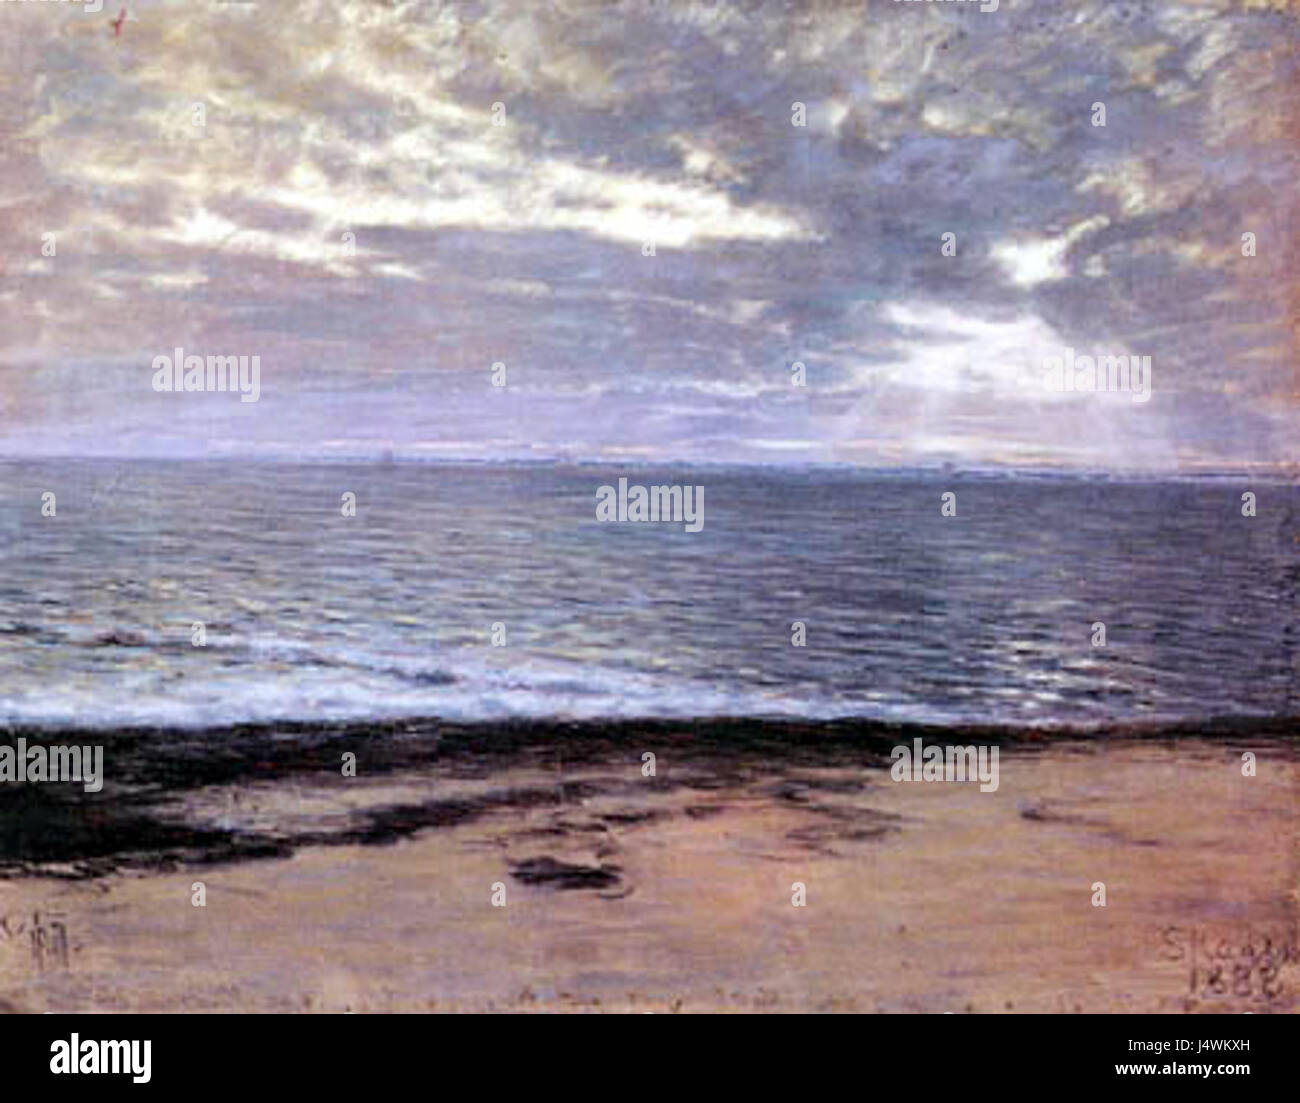 Thorvald Niss morgens am strand Stock Photo